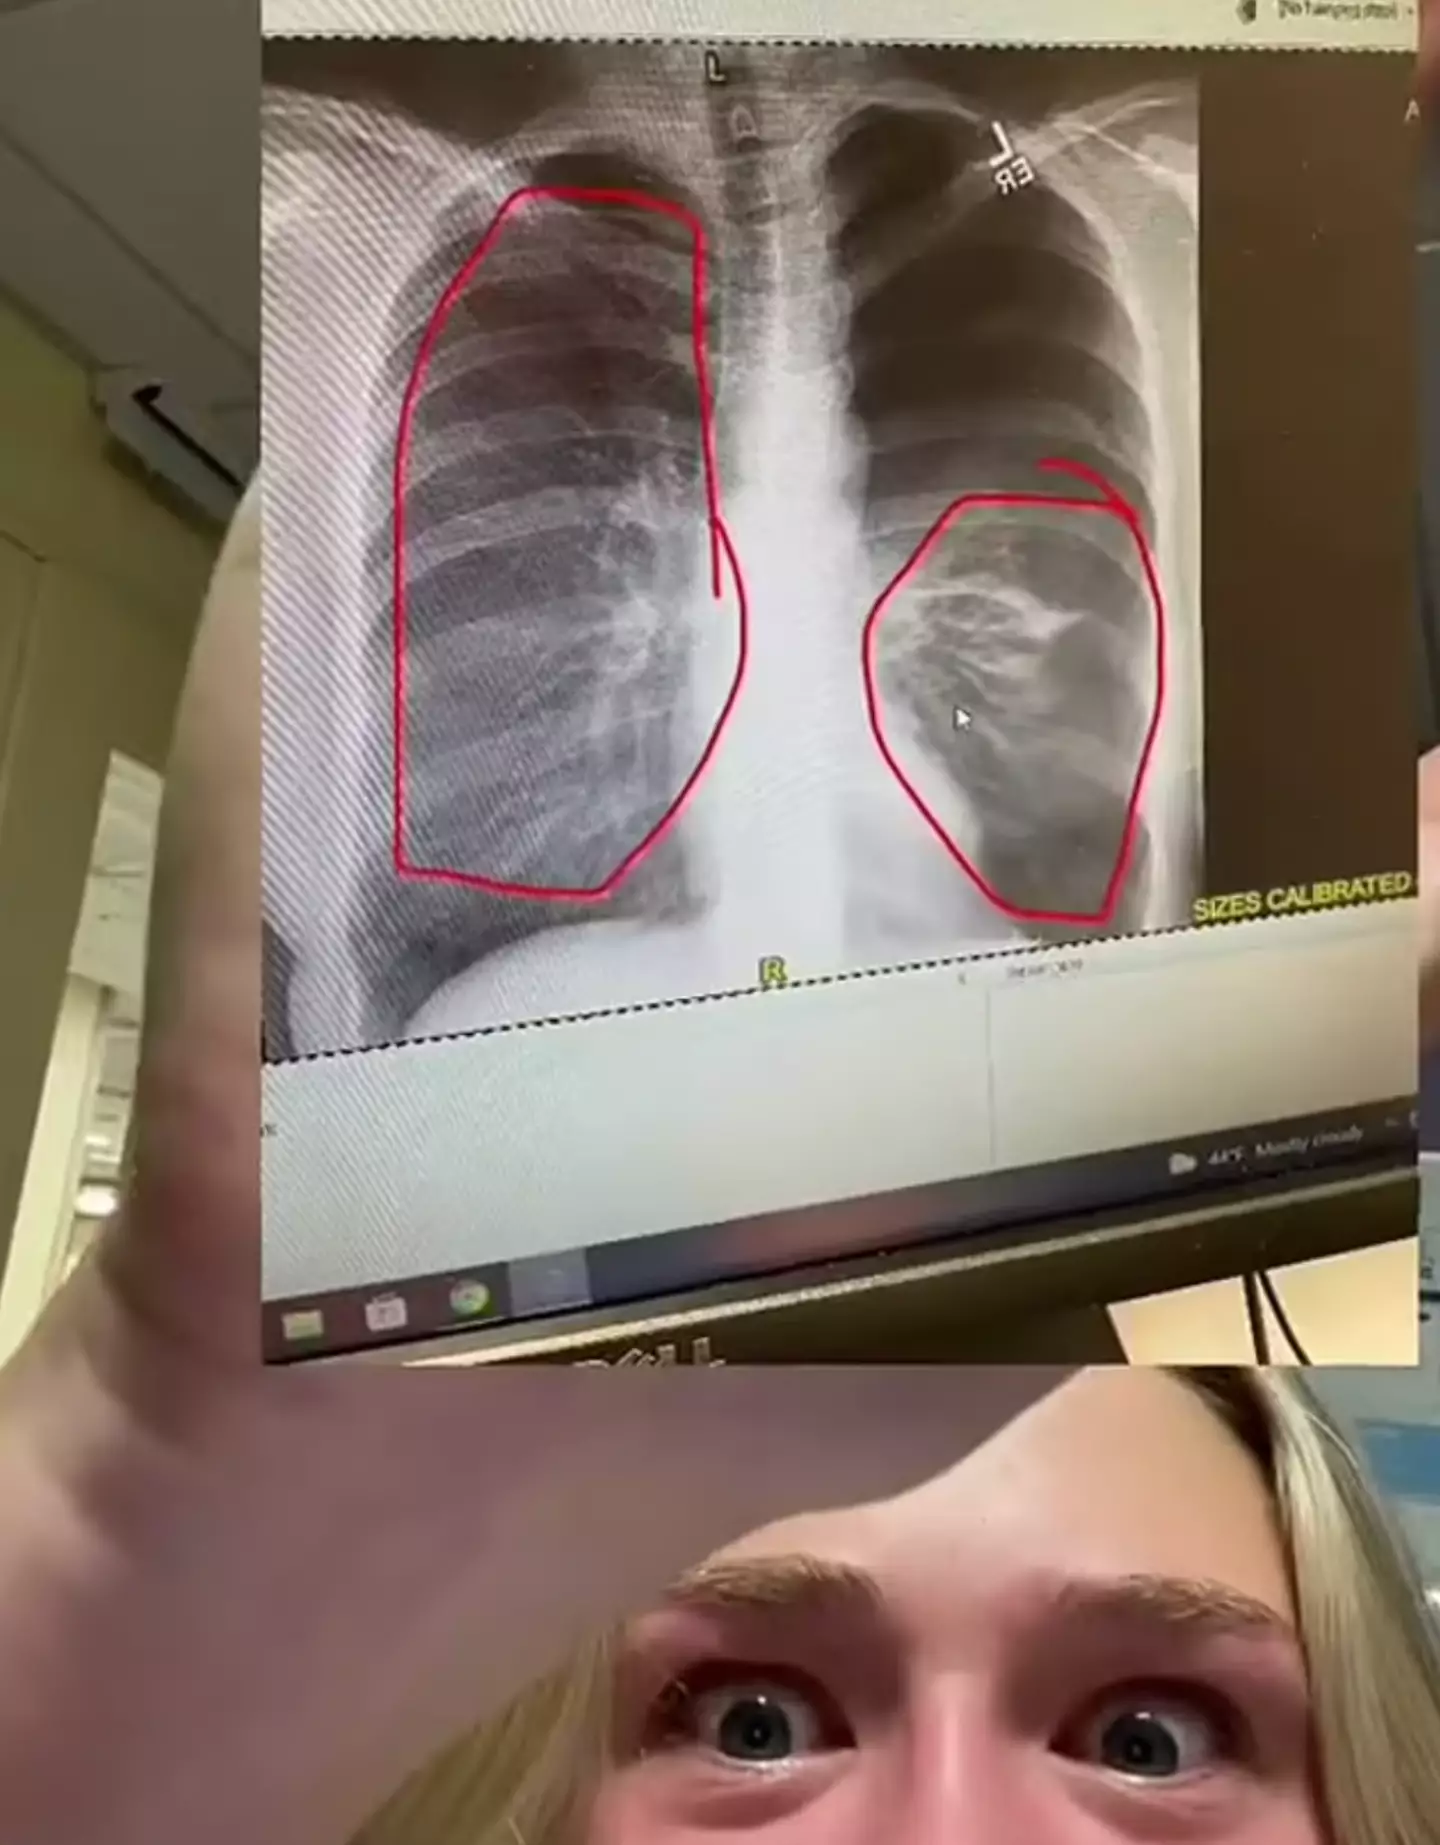 Vaping contributed to this collapsed lung.